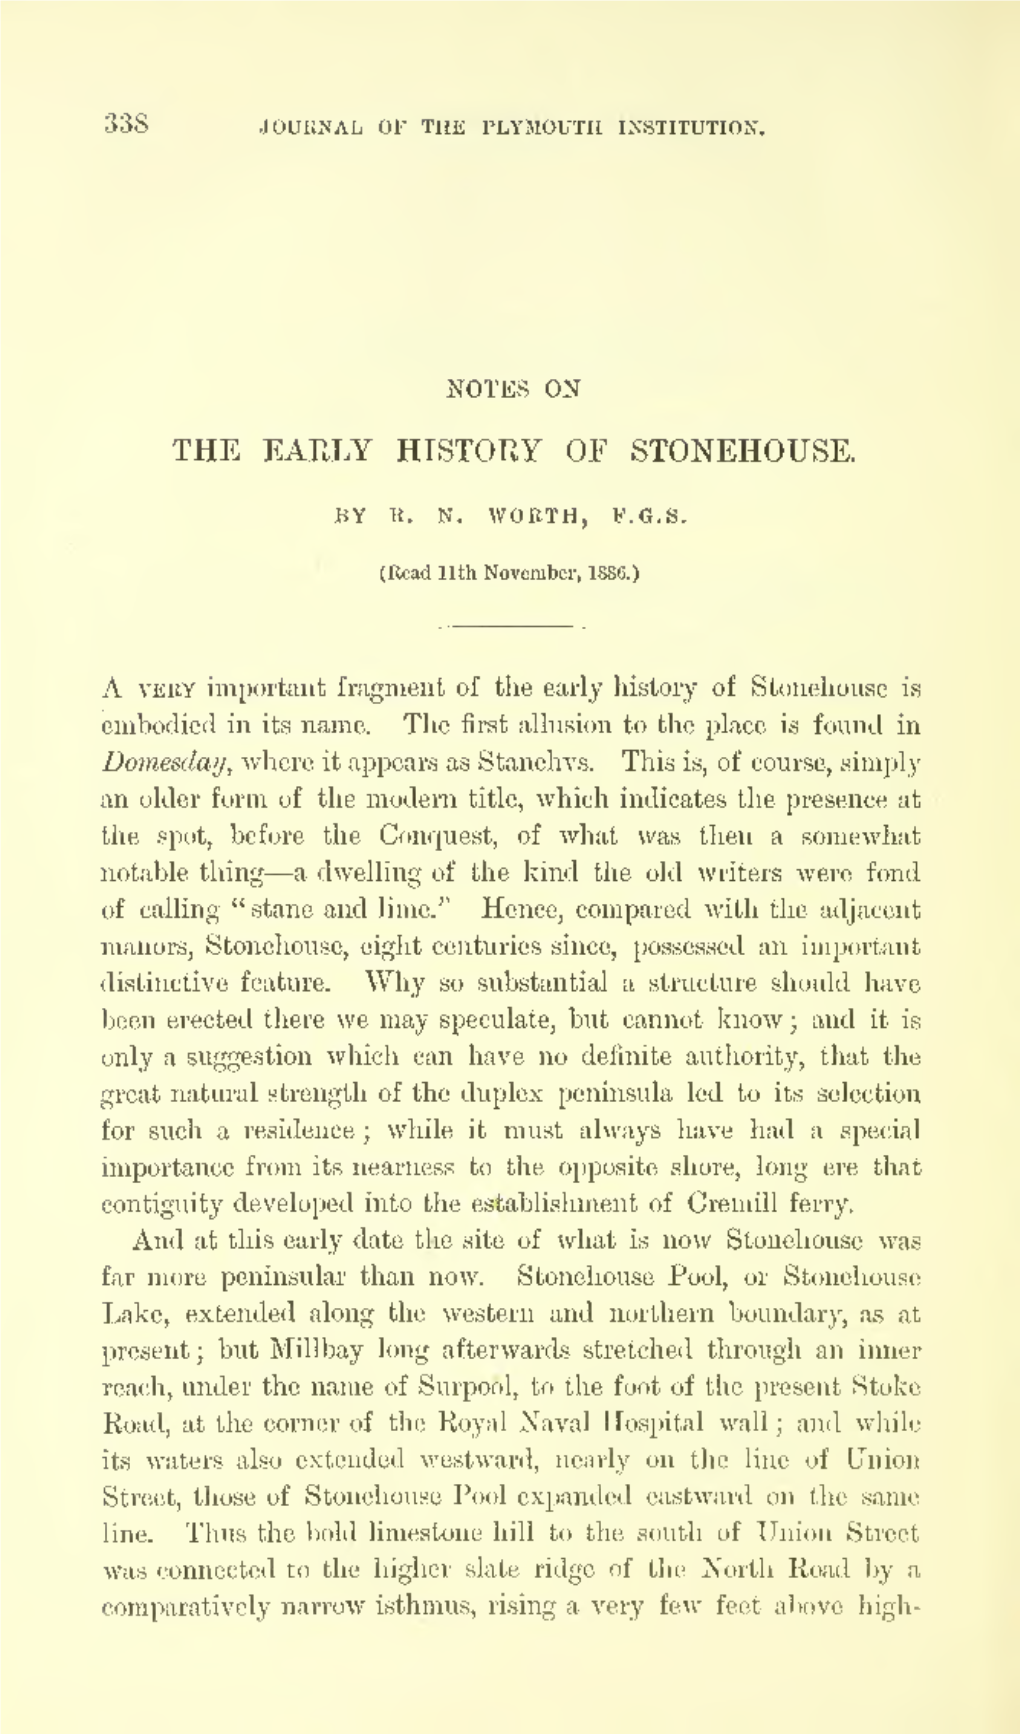 The Early History of Stonehouse Is Embodied in Its Name